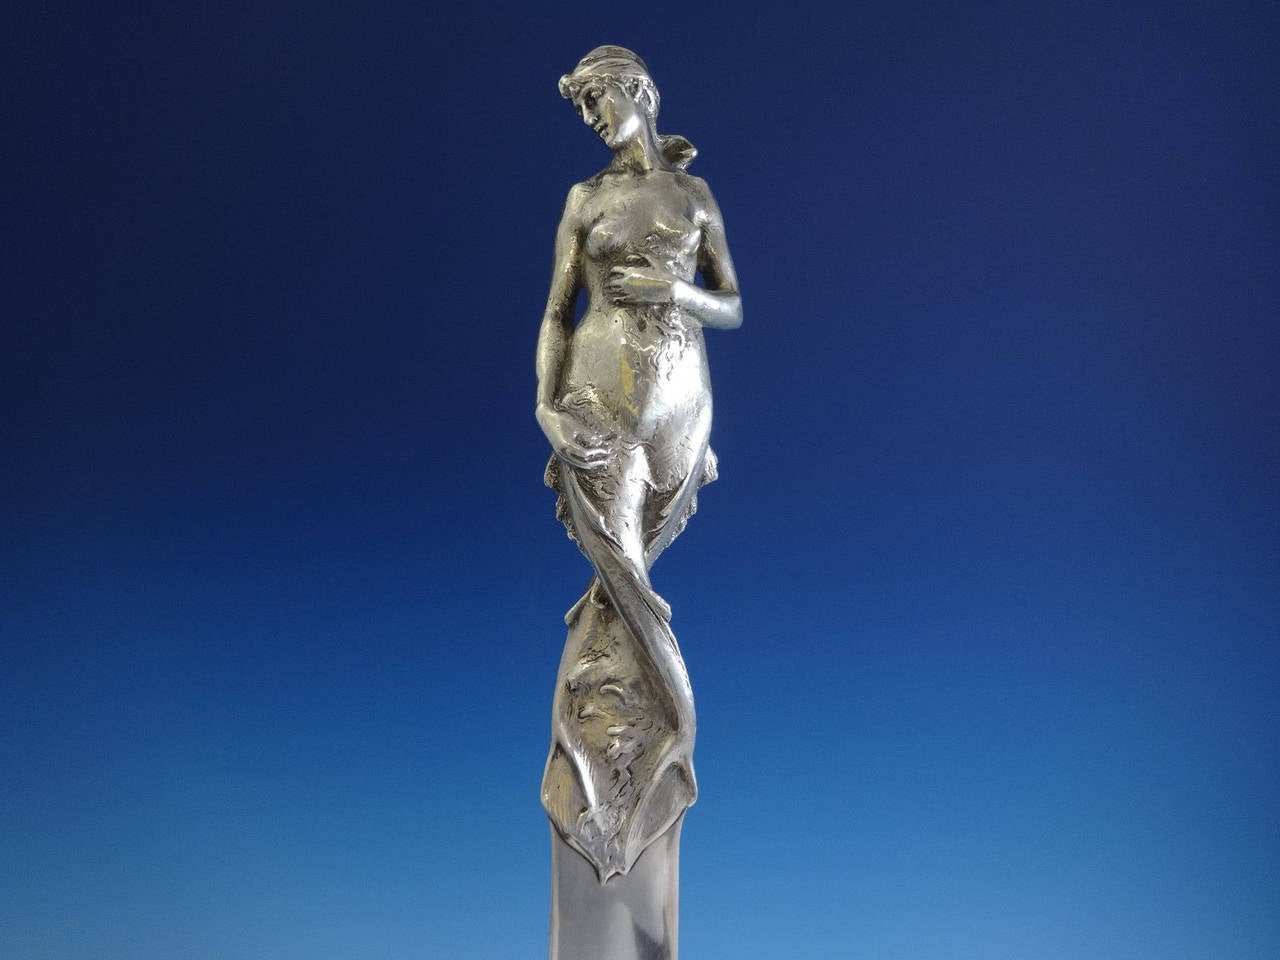 Whiting.

Sterling silver beautiful Art Nouveau cast 3-D figural page turner/paper knife by Whiting. This is a superb piece weighing over 14 troy ounces and measuring almost 18” long. This impressive piece features an Art Nouveau nude mermaid in